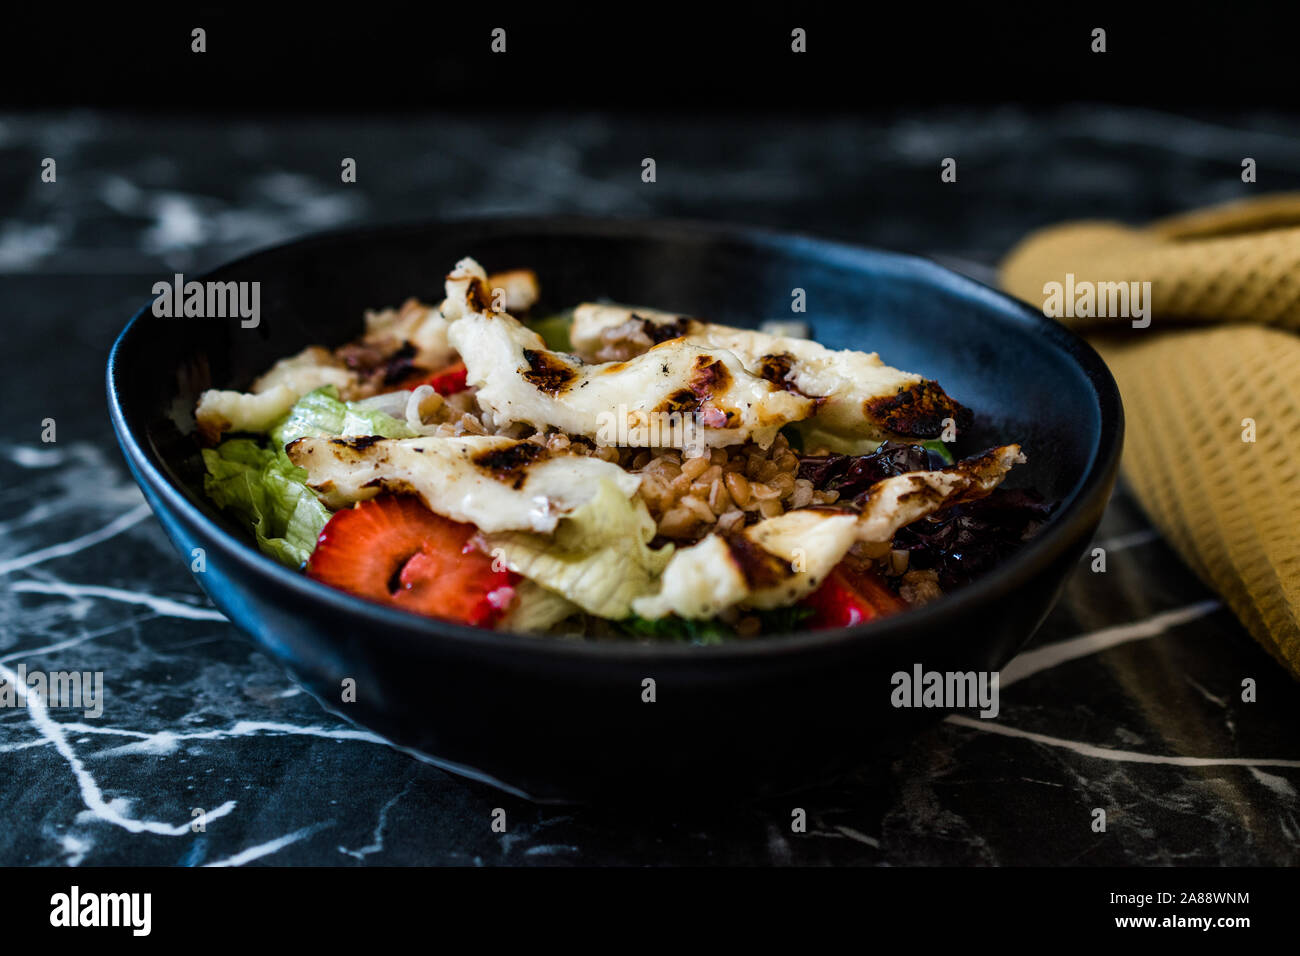 Grilled Halloumi Cheese Salad with Strawberry Slices and Buckwheat / Hellim in Black Bowl on Dark Granite Surface. Organic Fresh Food. Stock Photo